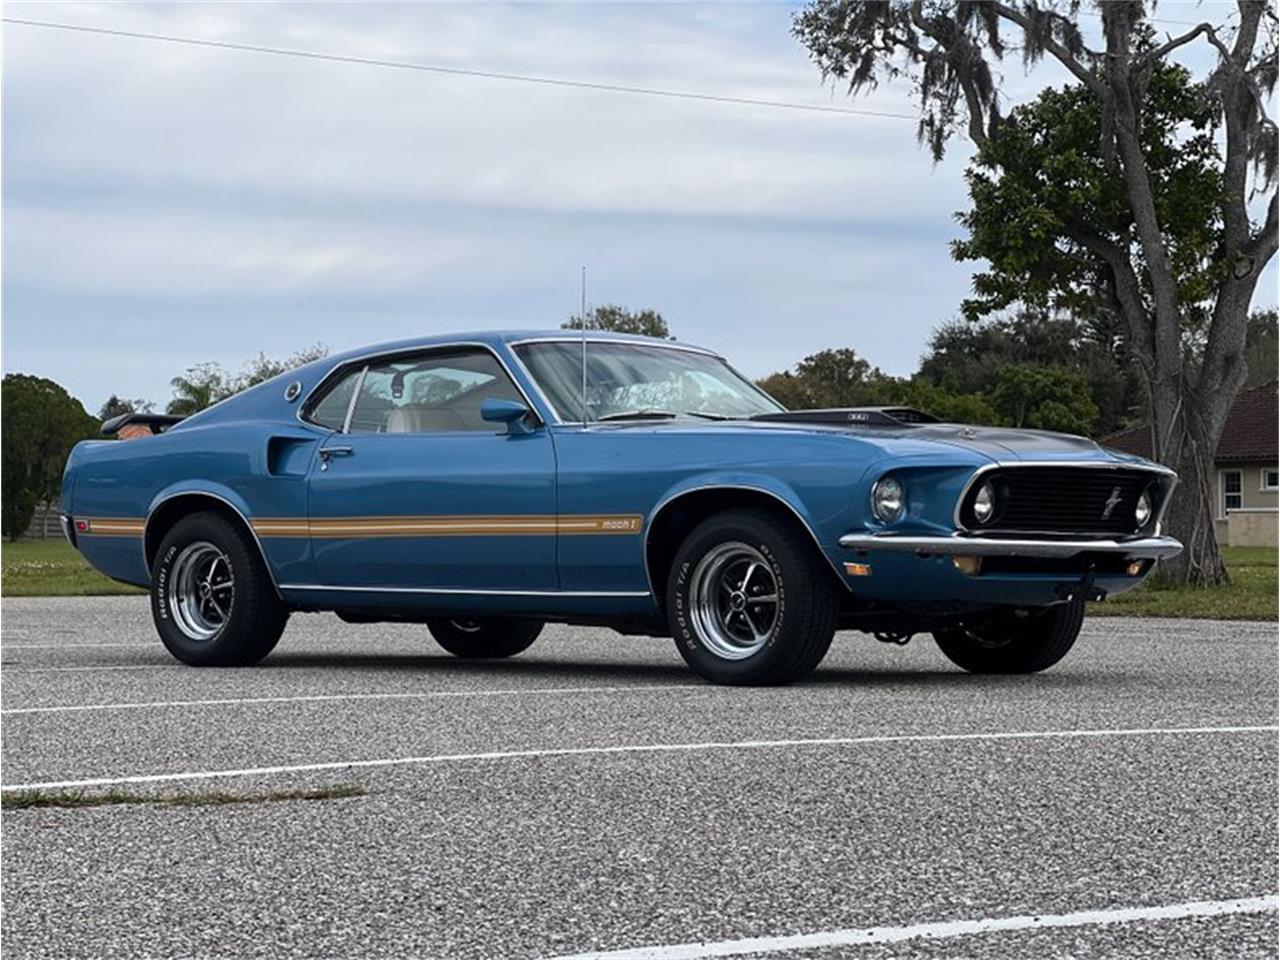 For Sale at Auction: 1969 Ford Mustang in Punta Gorda, Florida for sale in Punta Gorda, FL